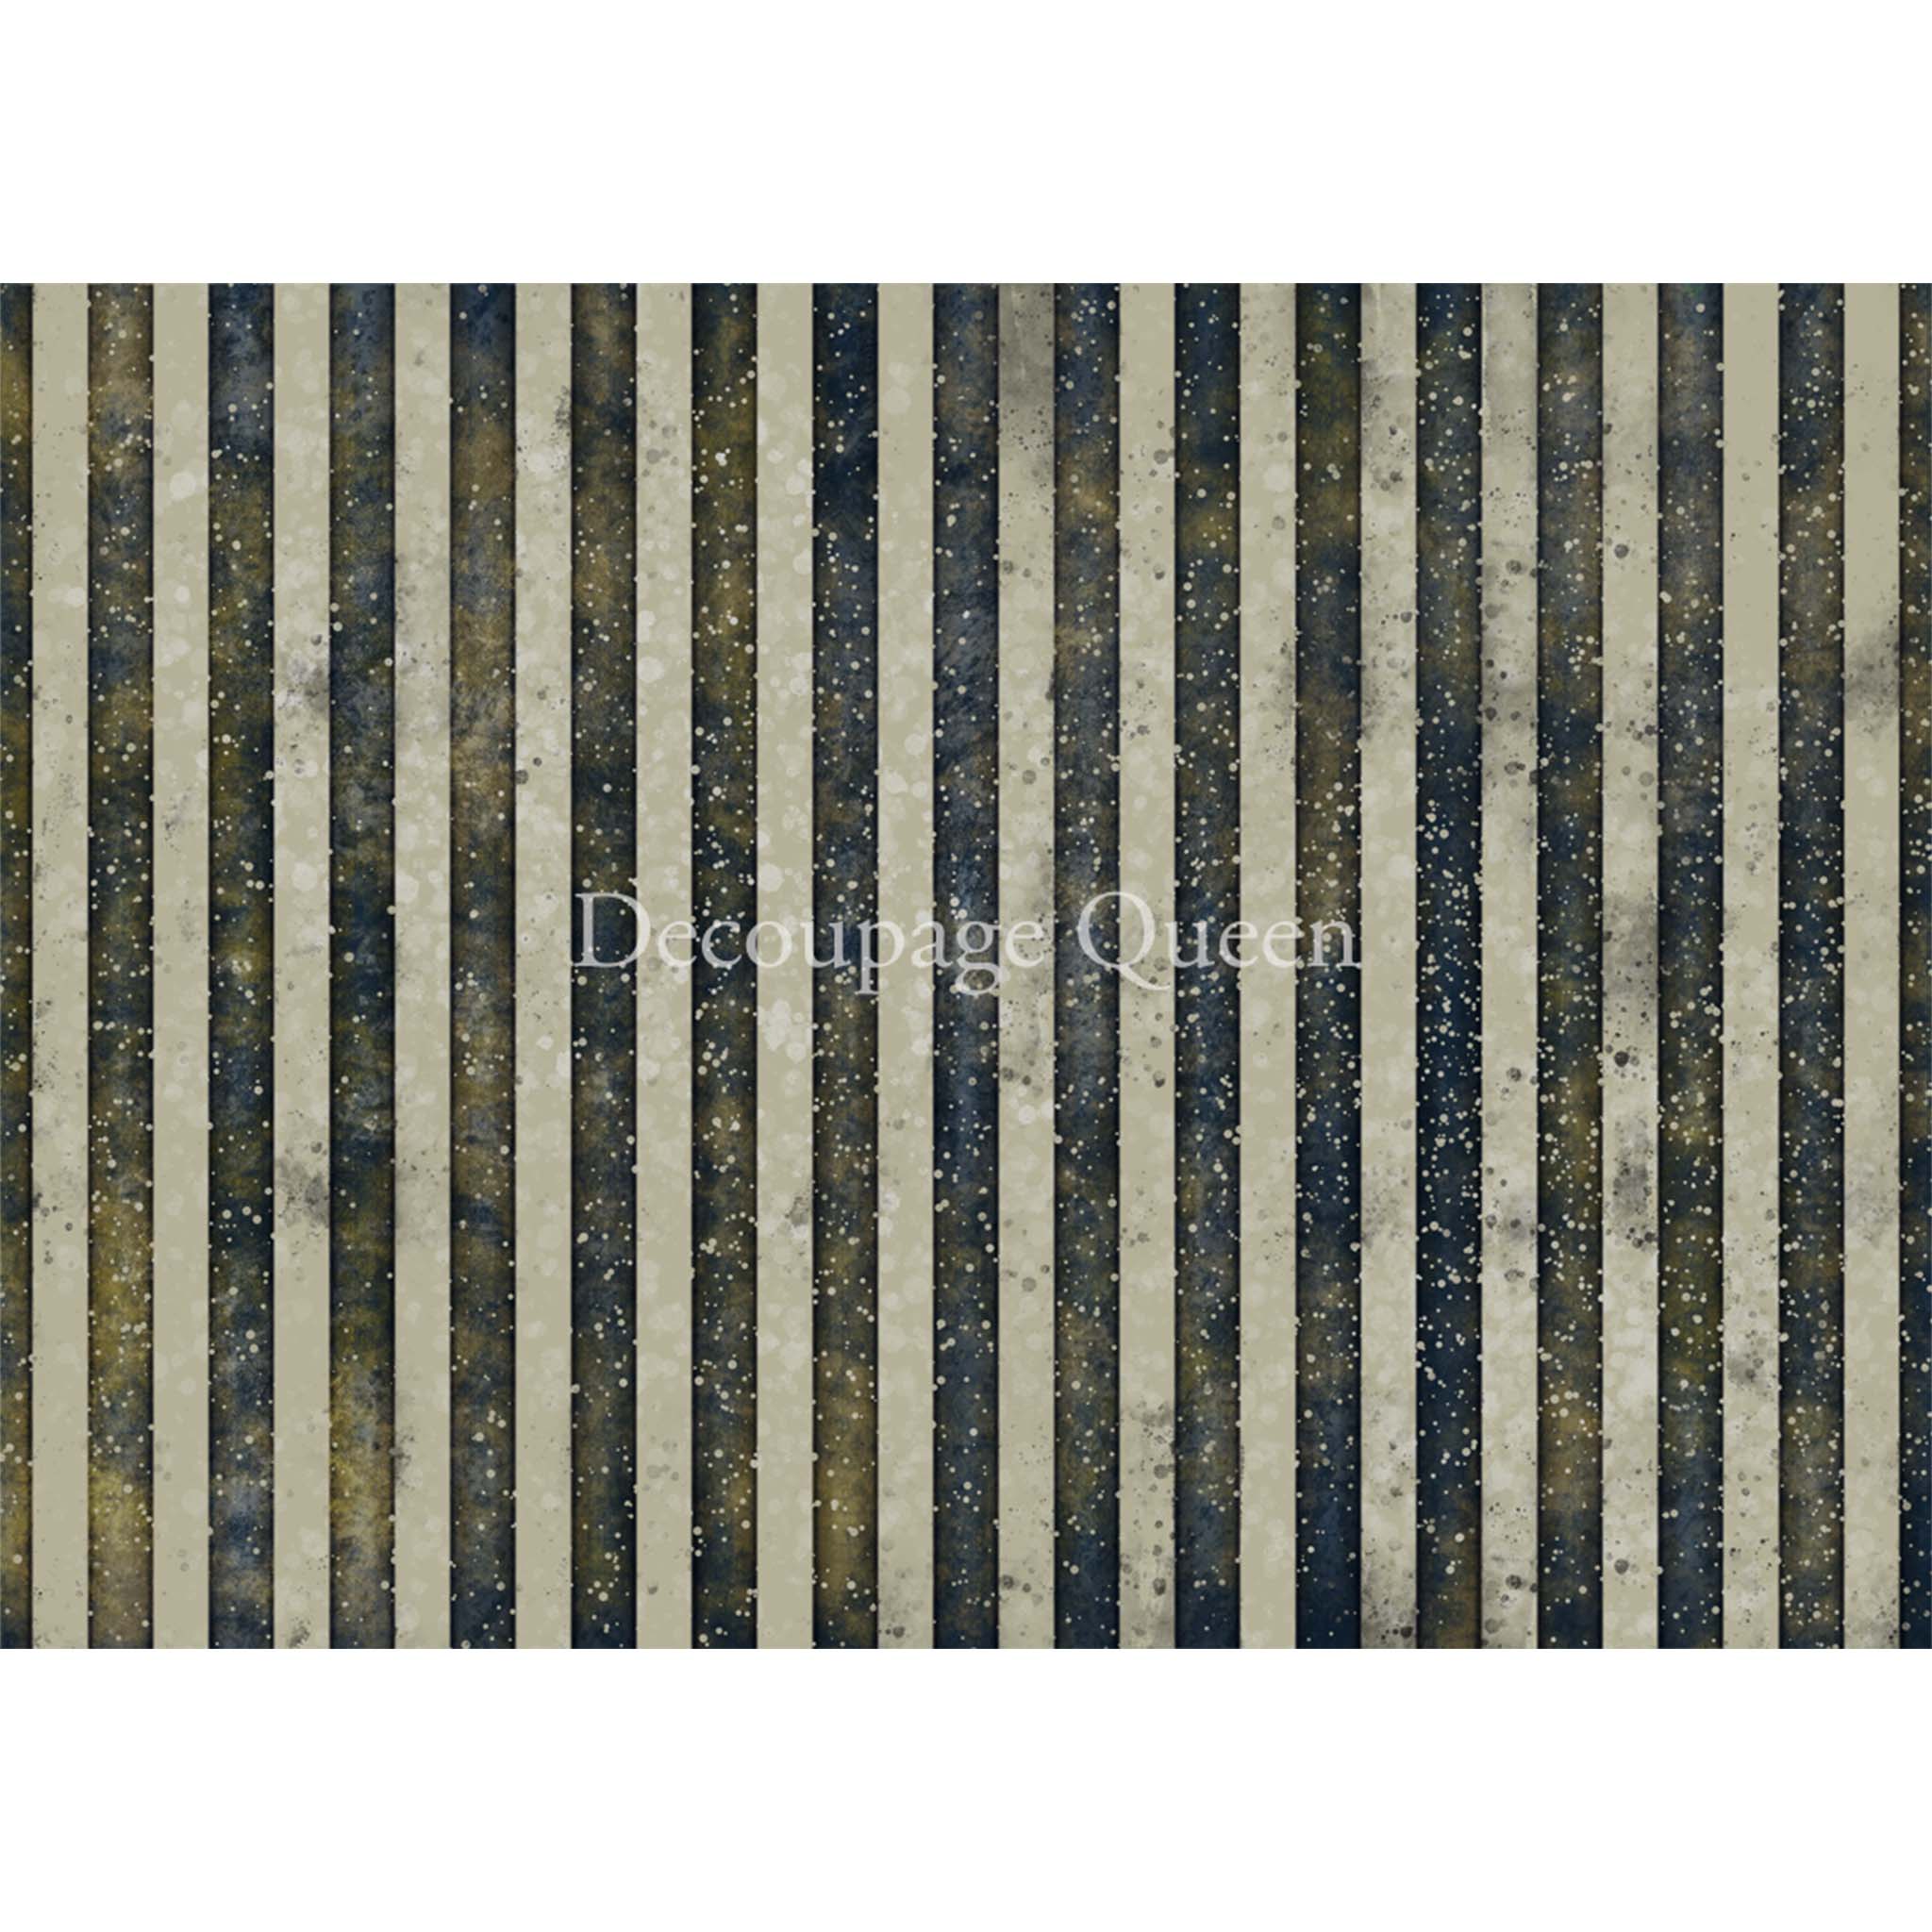 Rice paper design that features distressed stripe print in shades of blue, gray, and olive green. White borders are on the top and bottom.